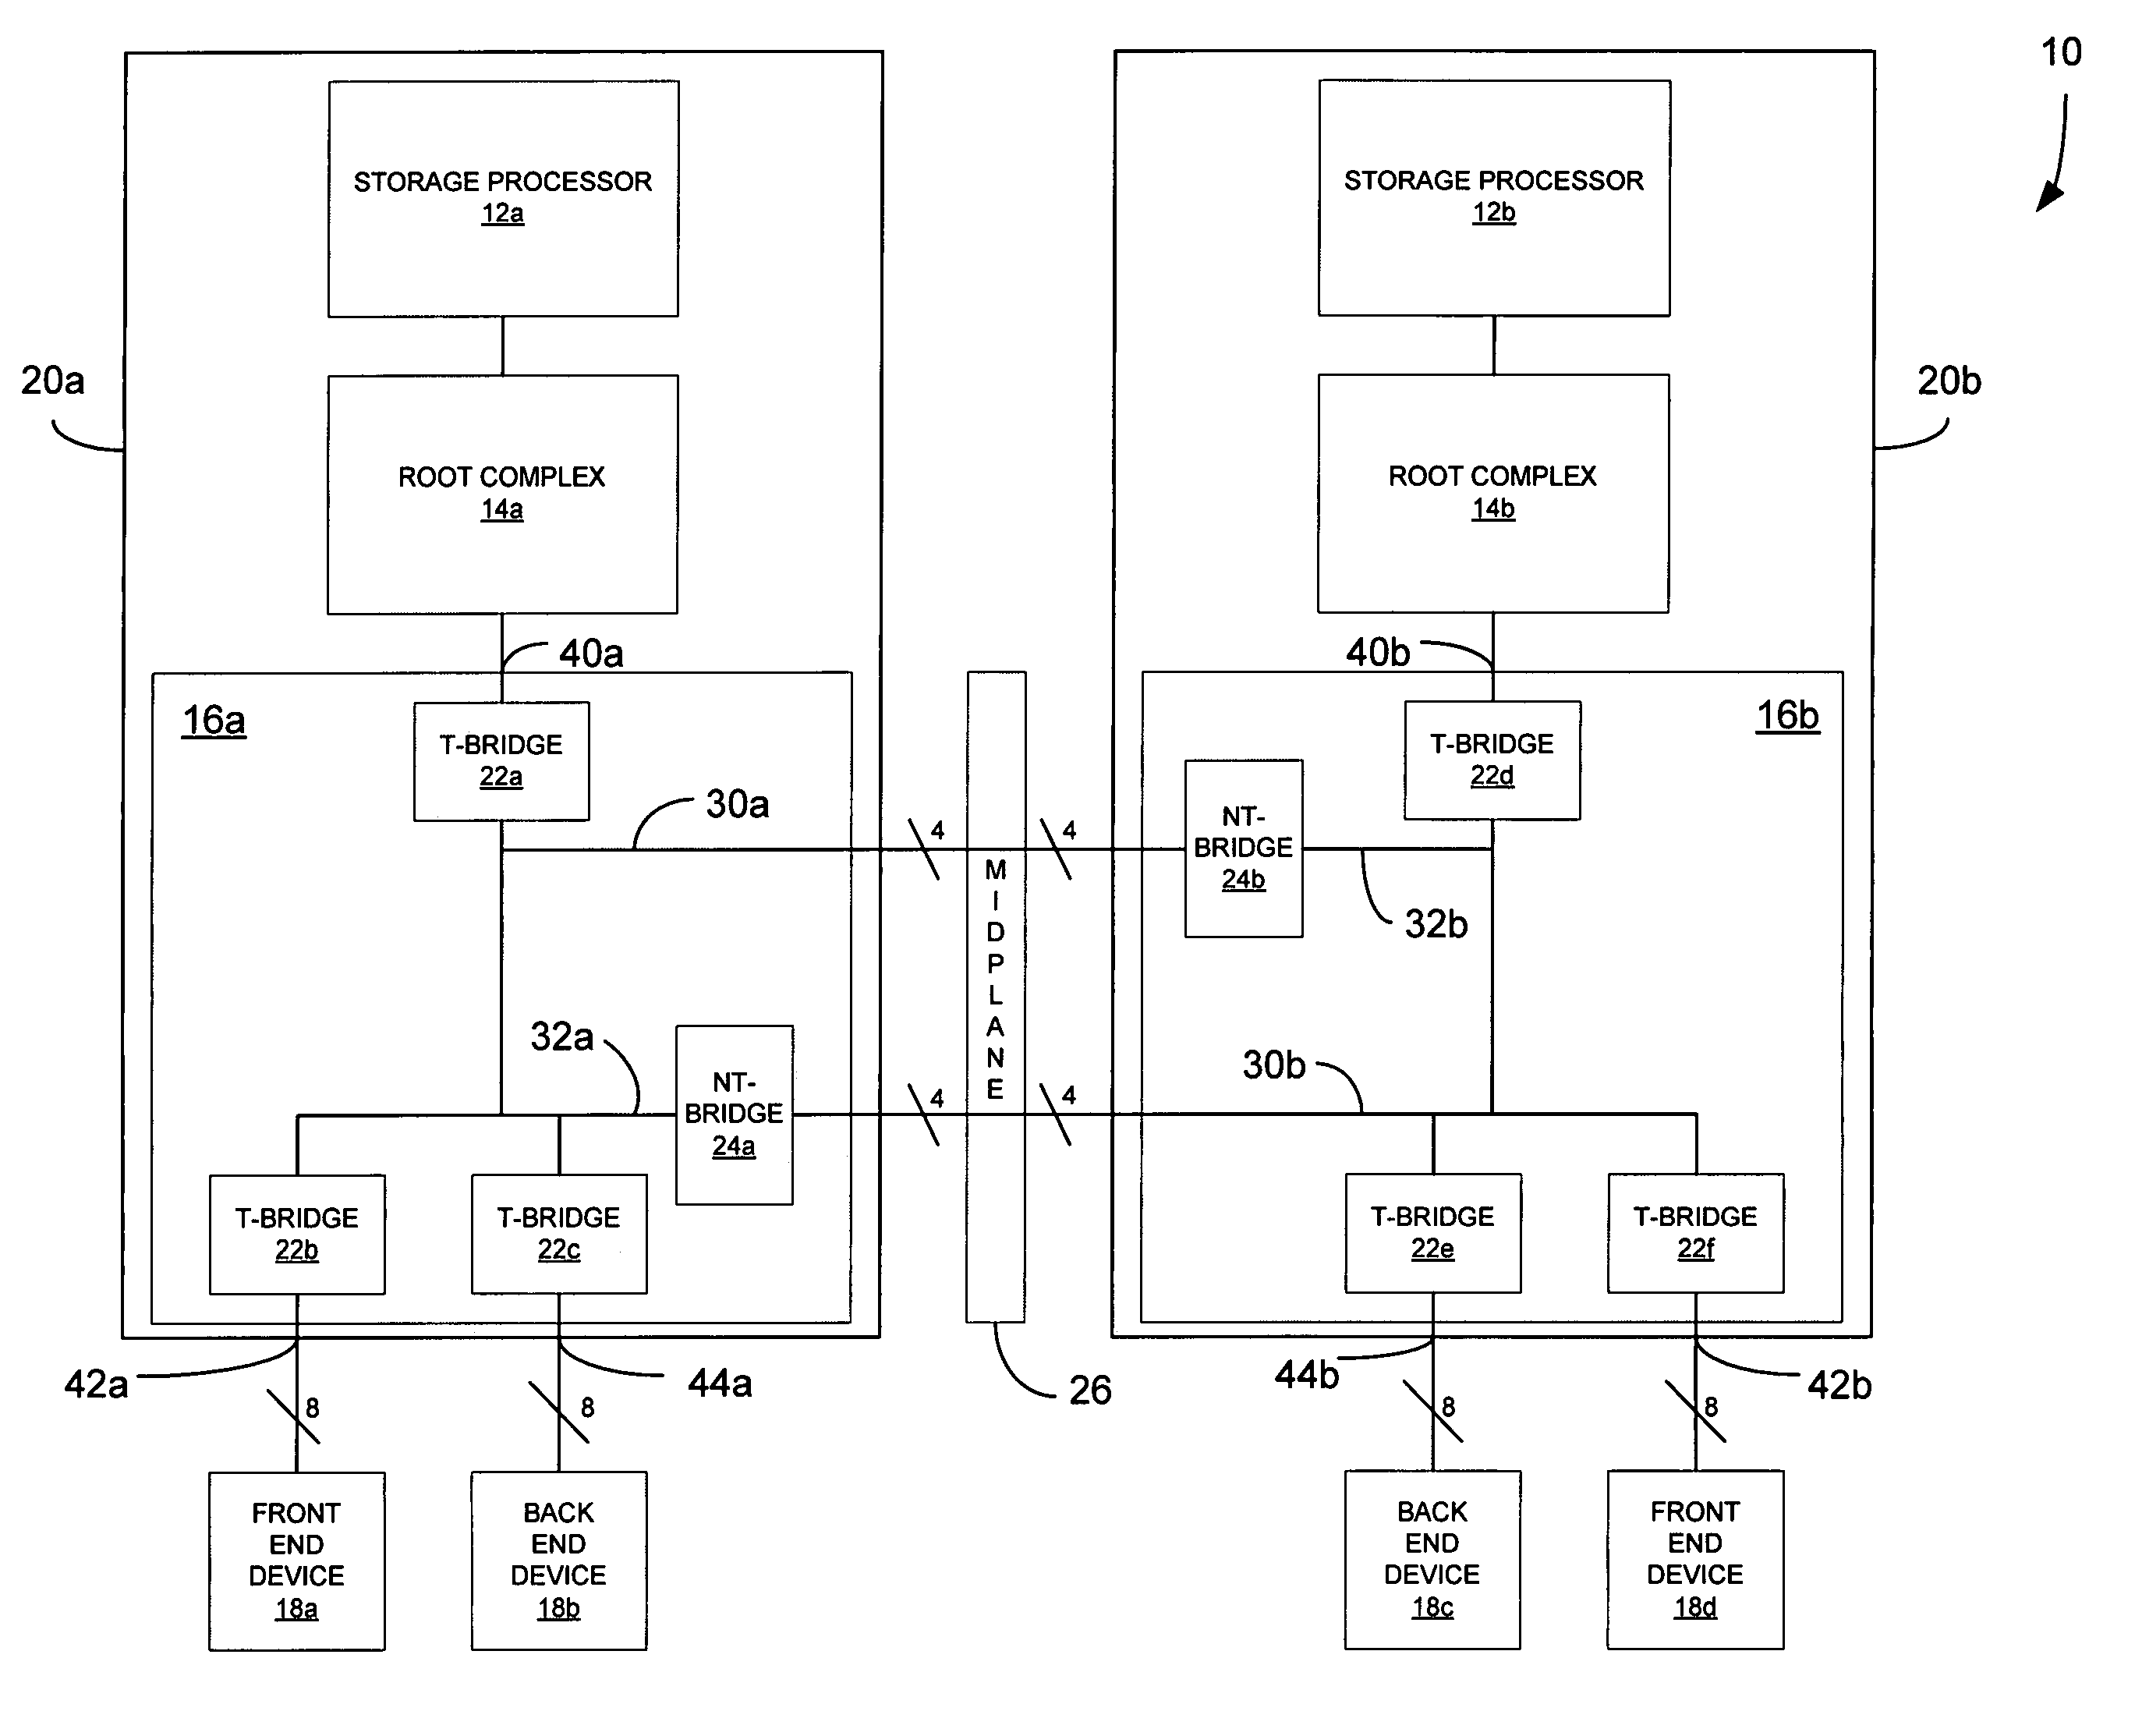 Root complex connection system